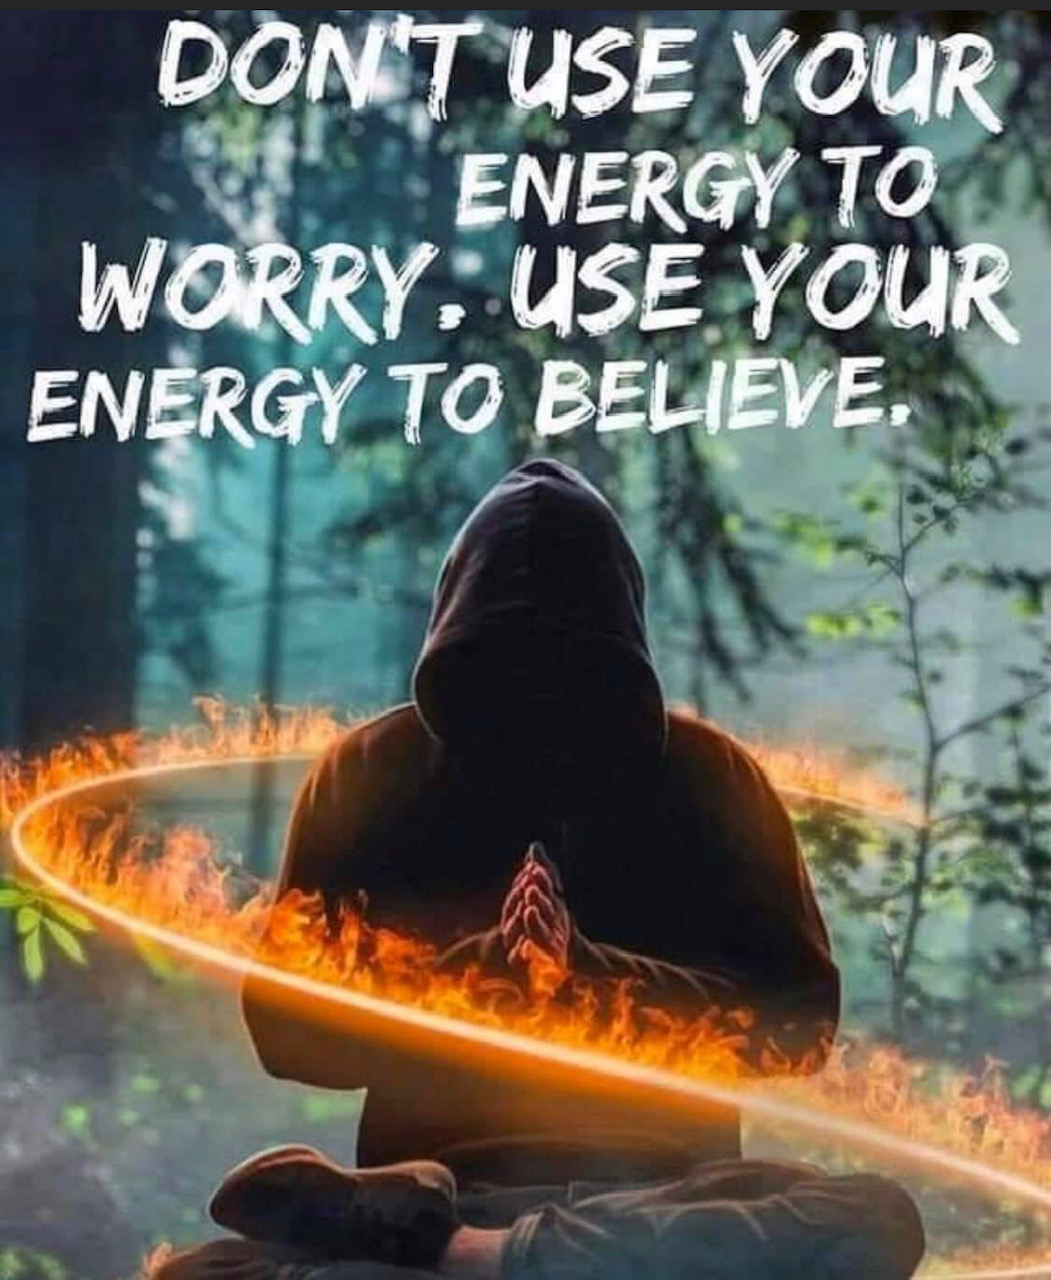 Don't use your energy to worry